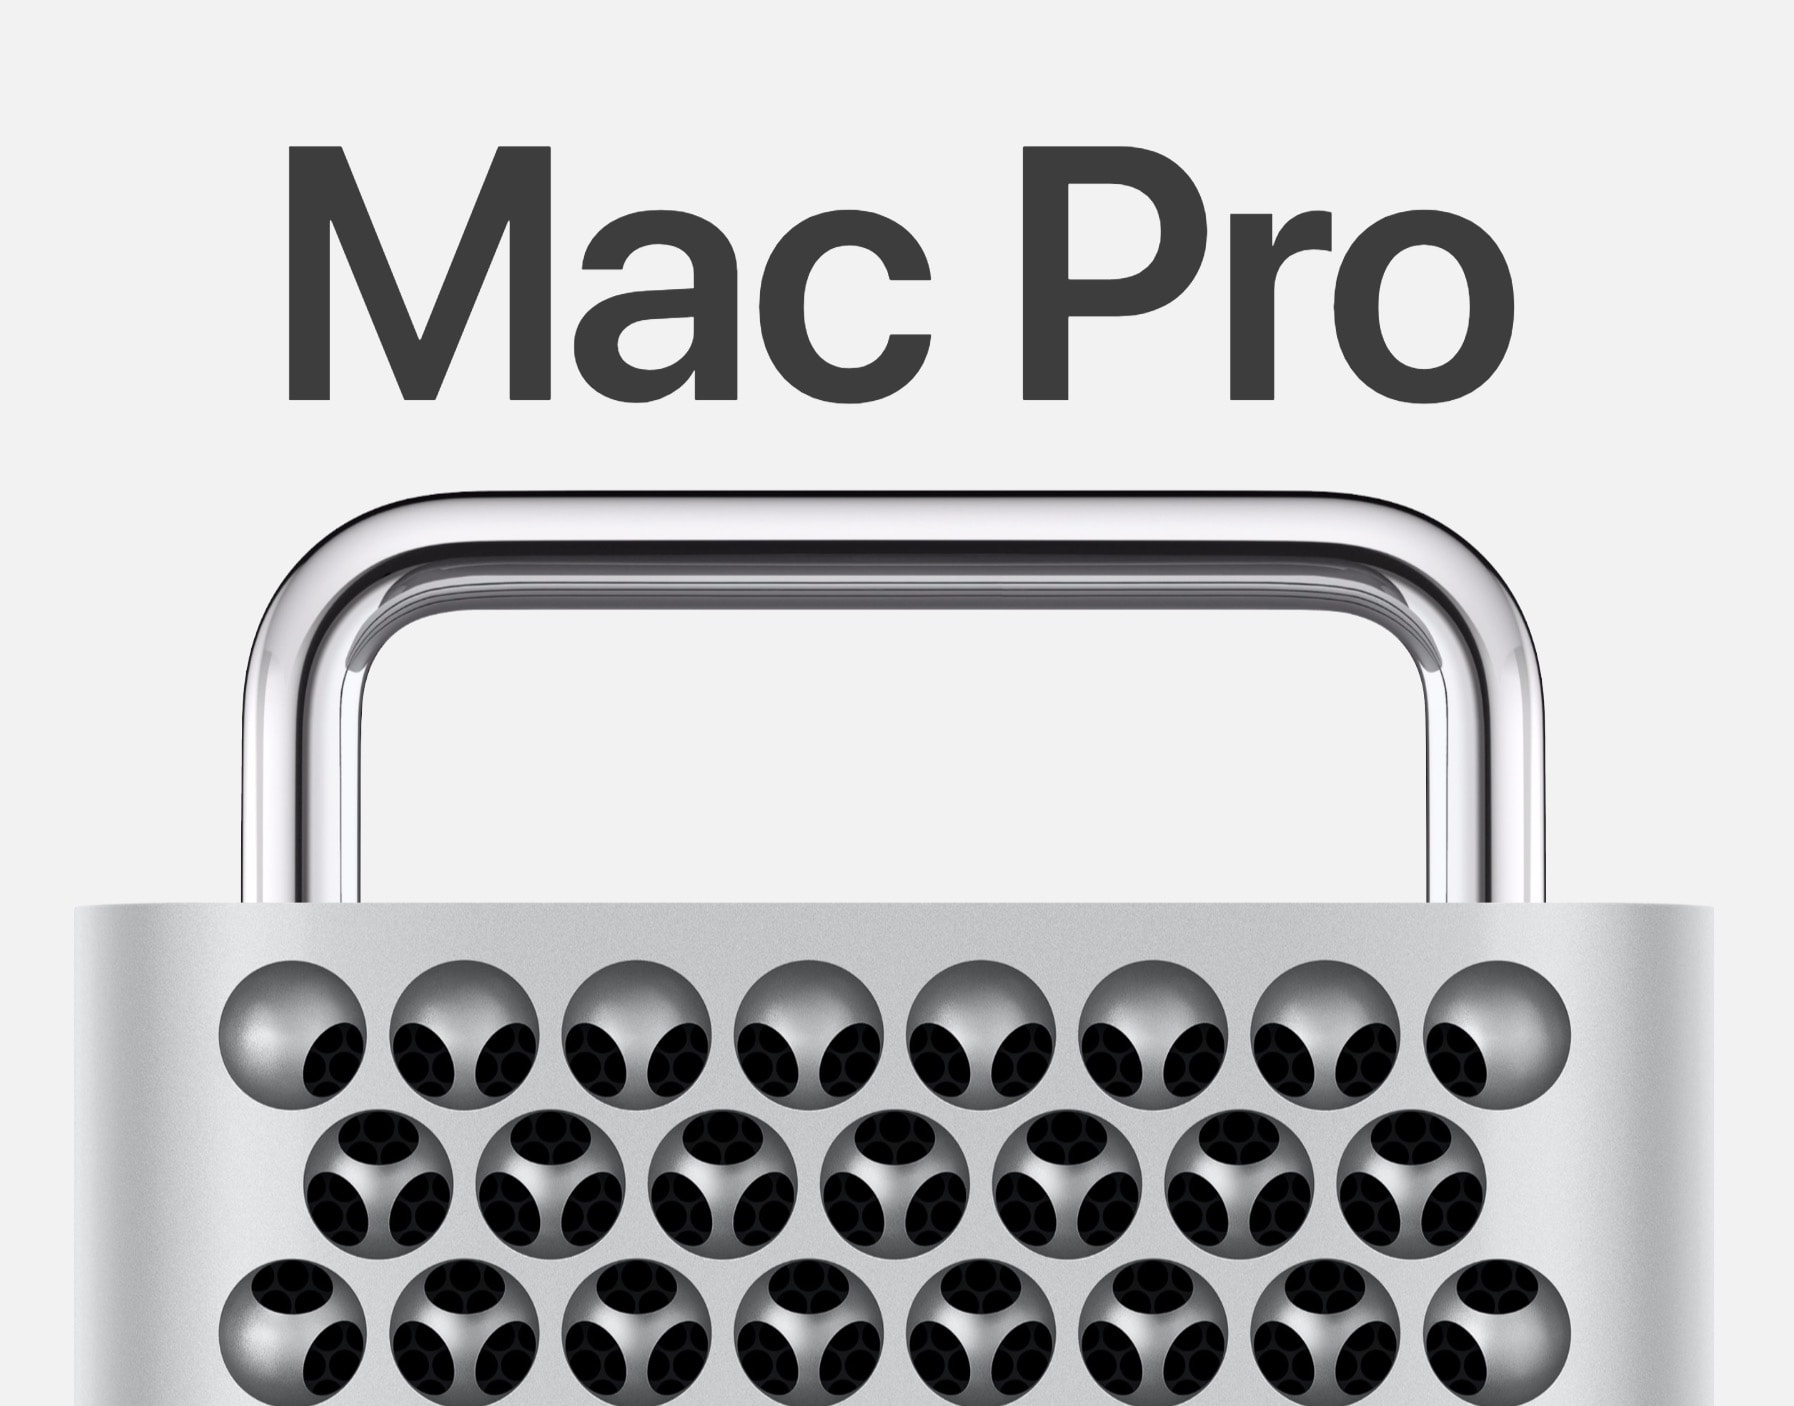 Tim Cook's comments on U.S. Mac Pro production were shocking